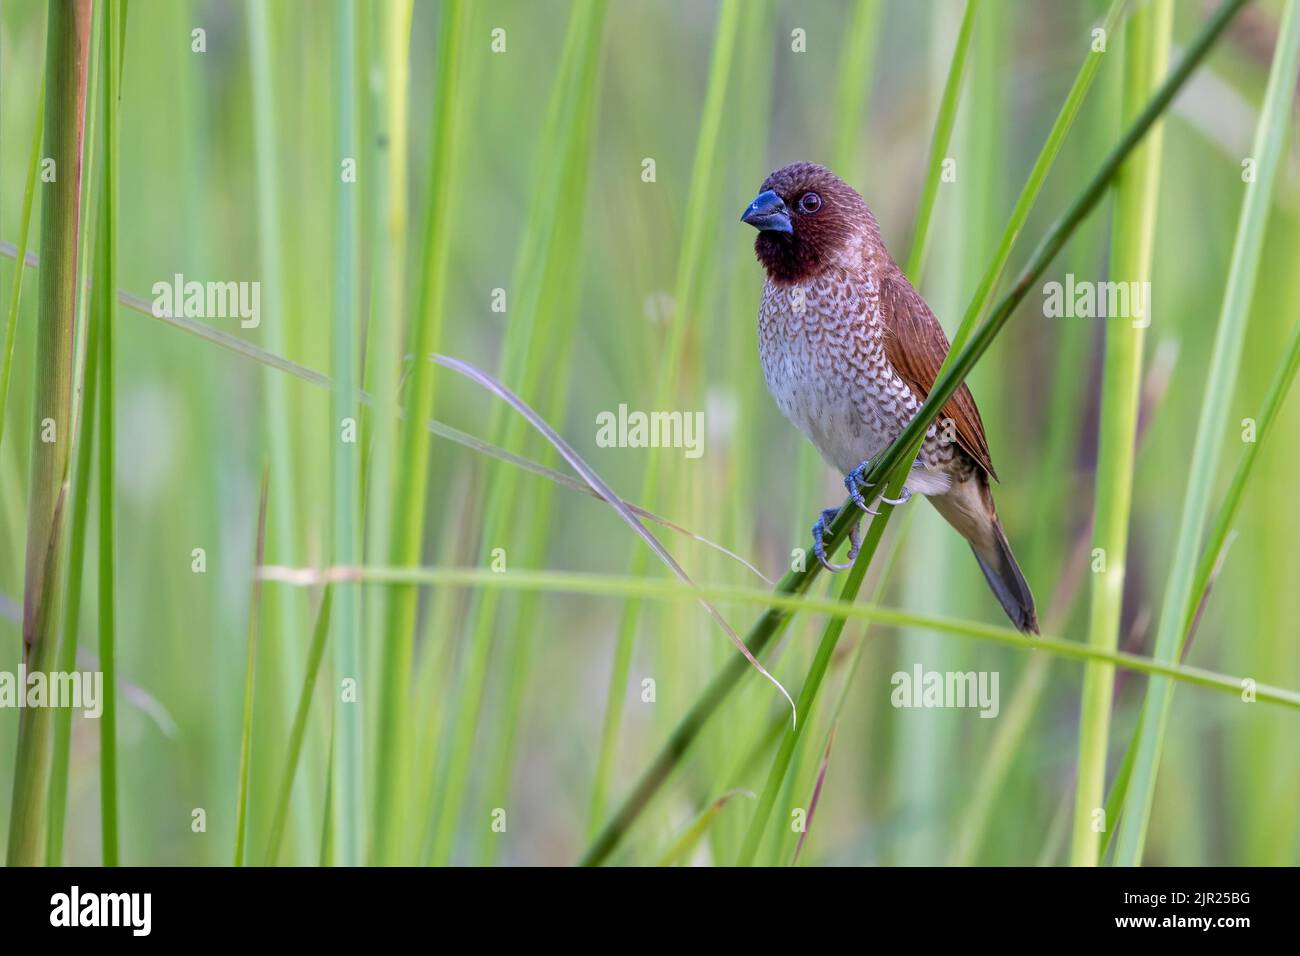 A Scaly-breasted munia (Lonchura punctulata) standing on a blade of grass in a Bangkok park, Thailand Stock Photo